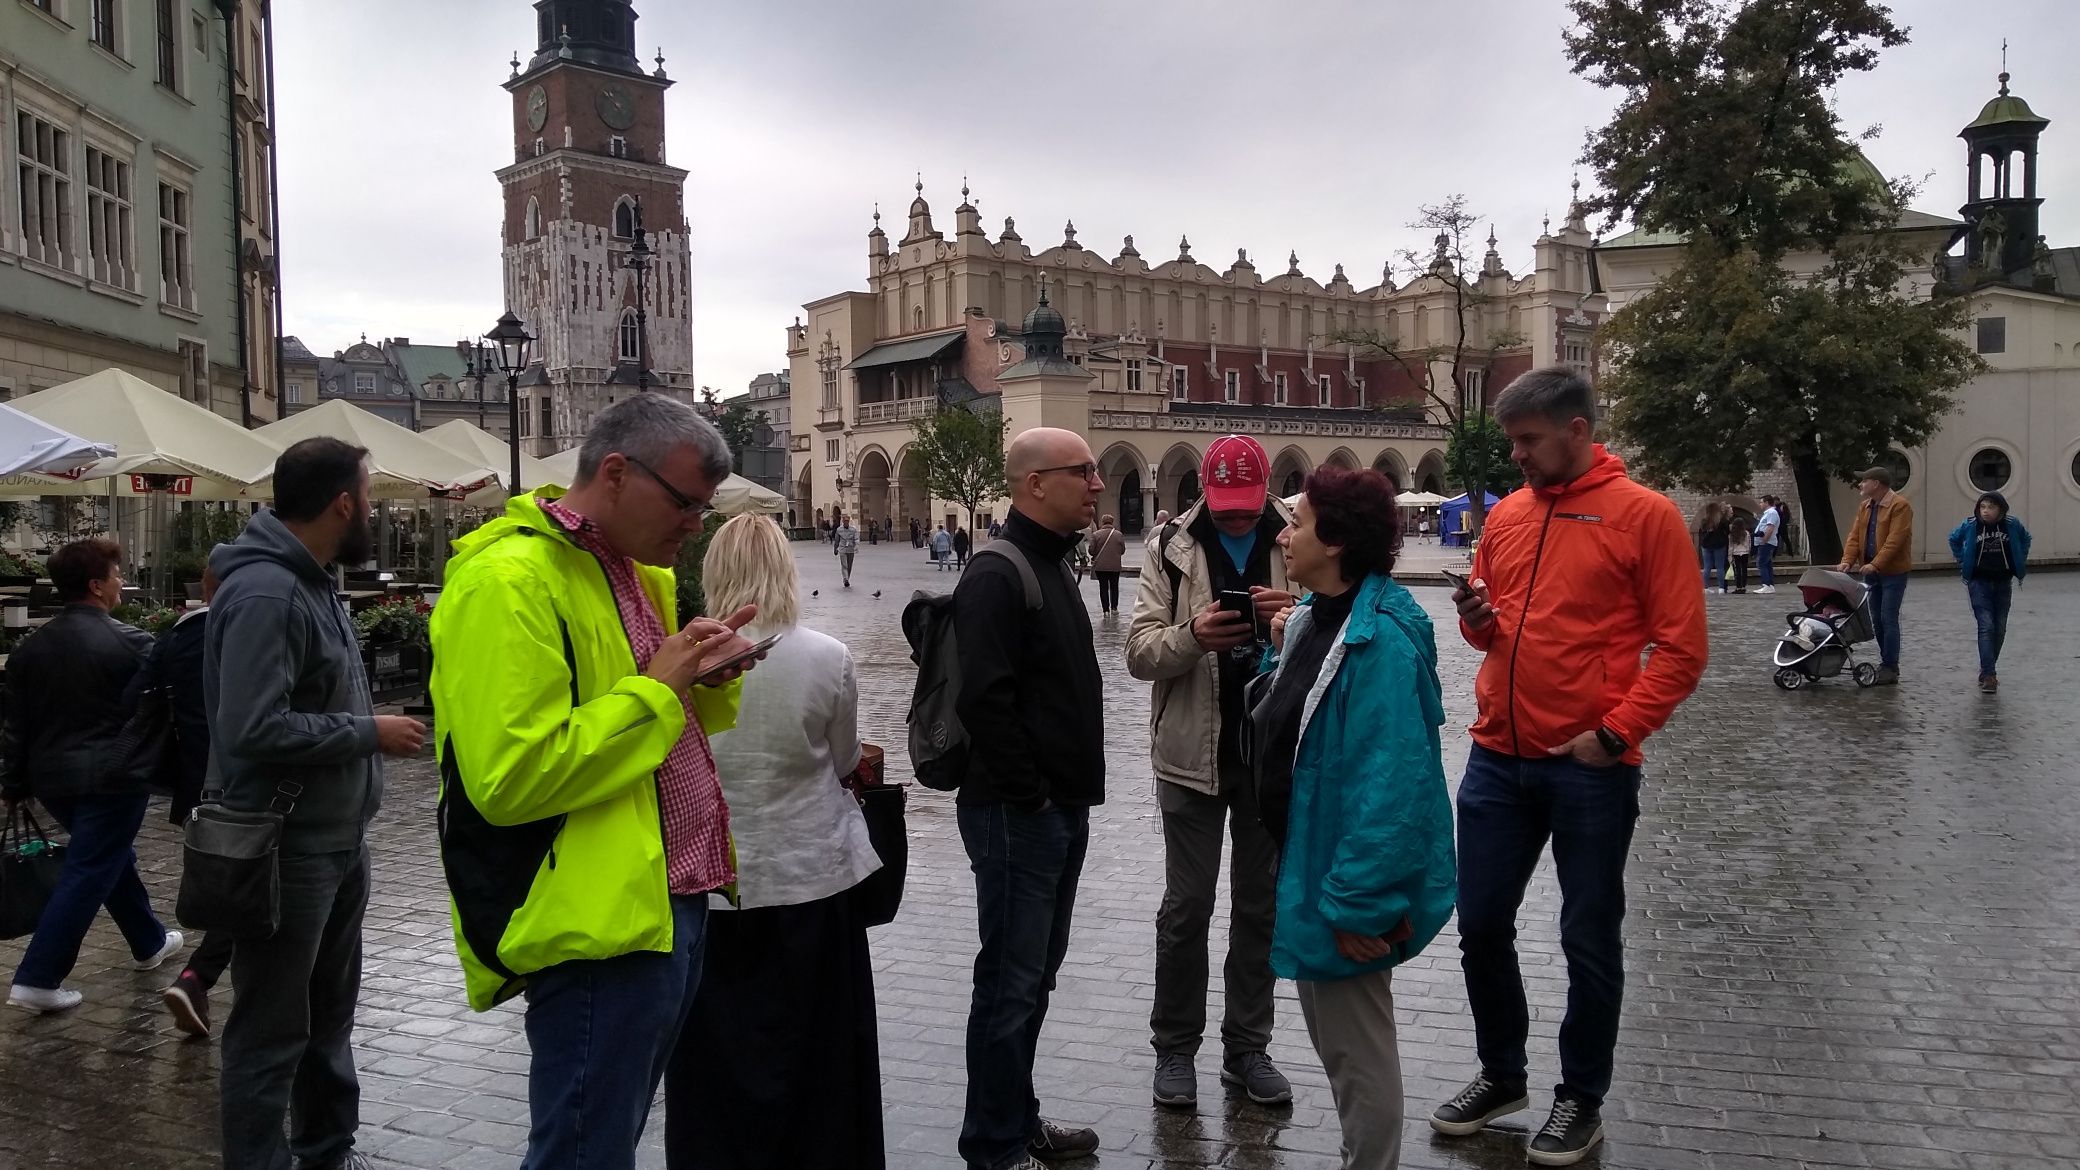 Local Guides in action during the European Meetup in Krakow